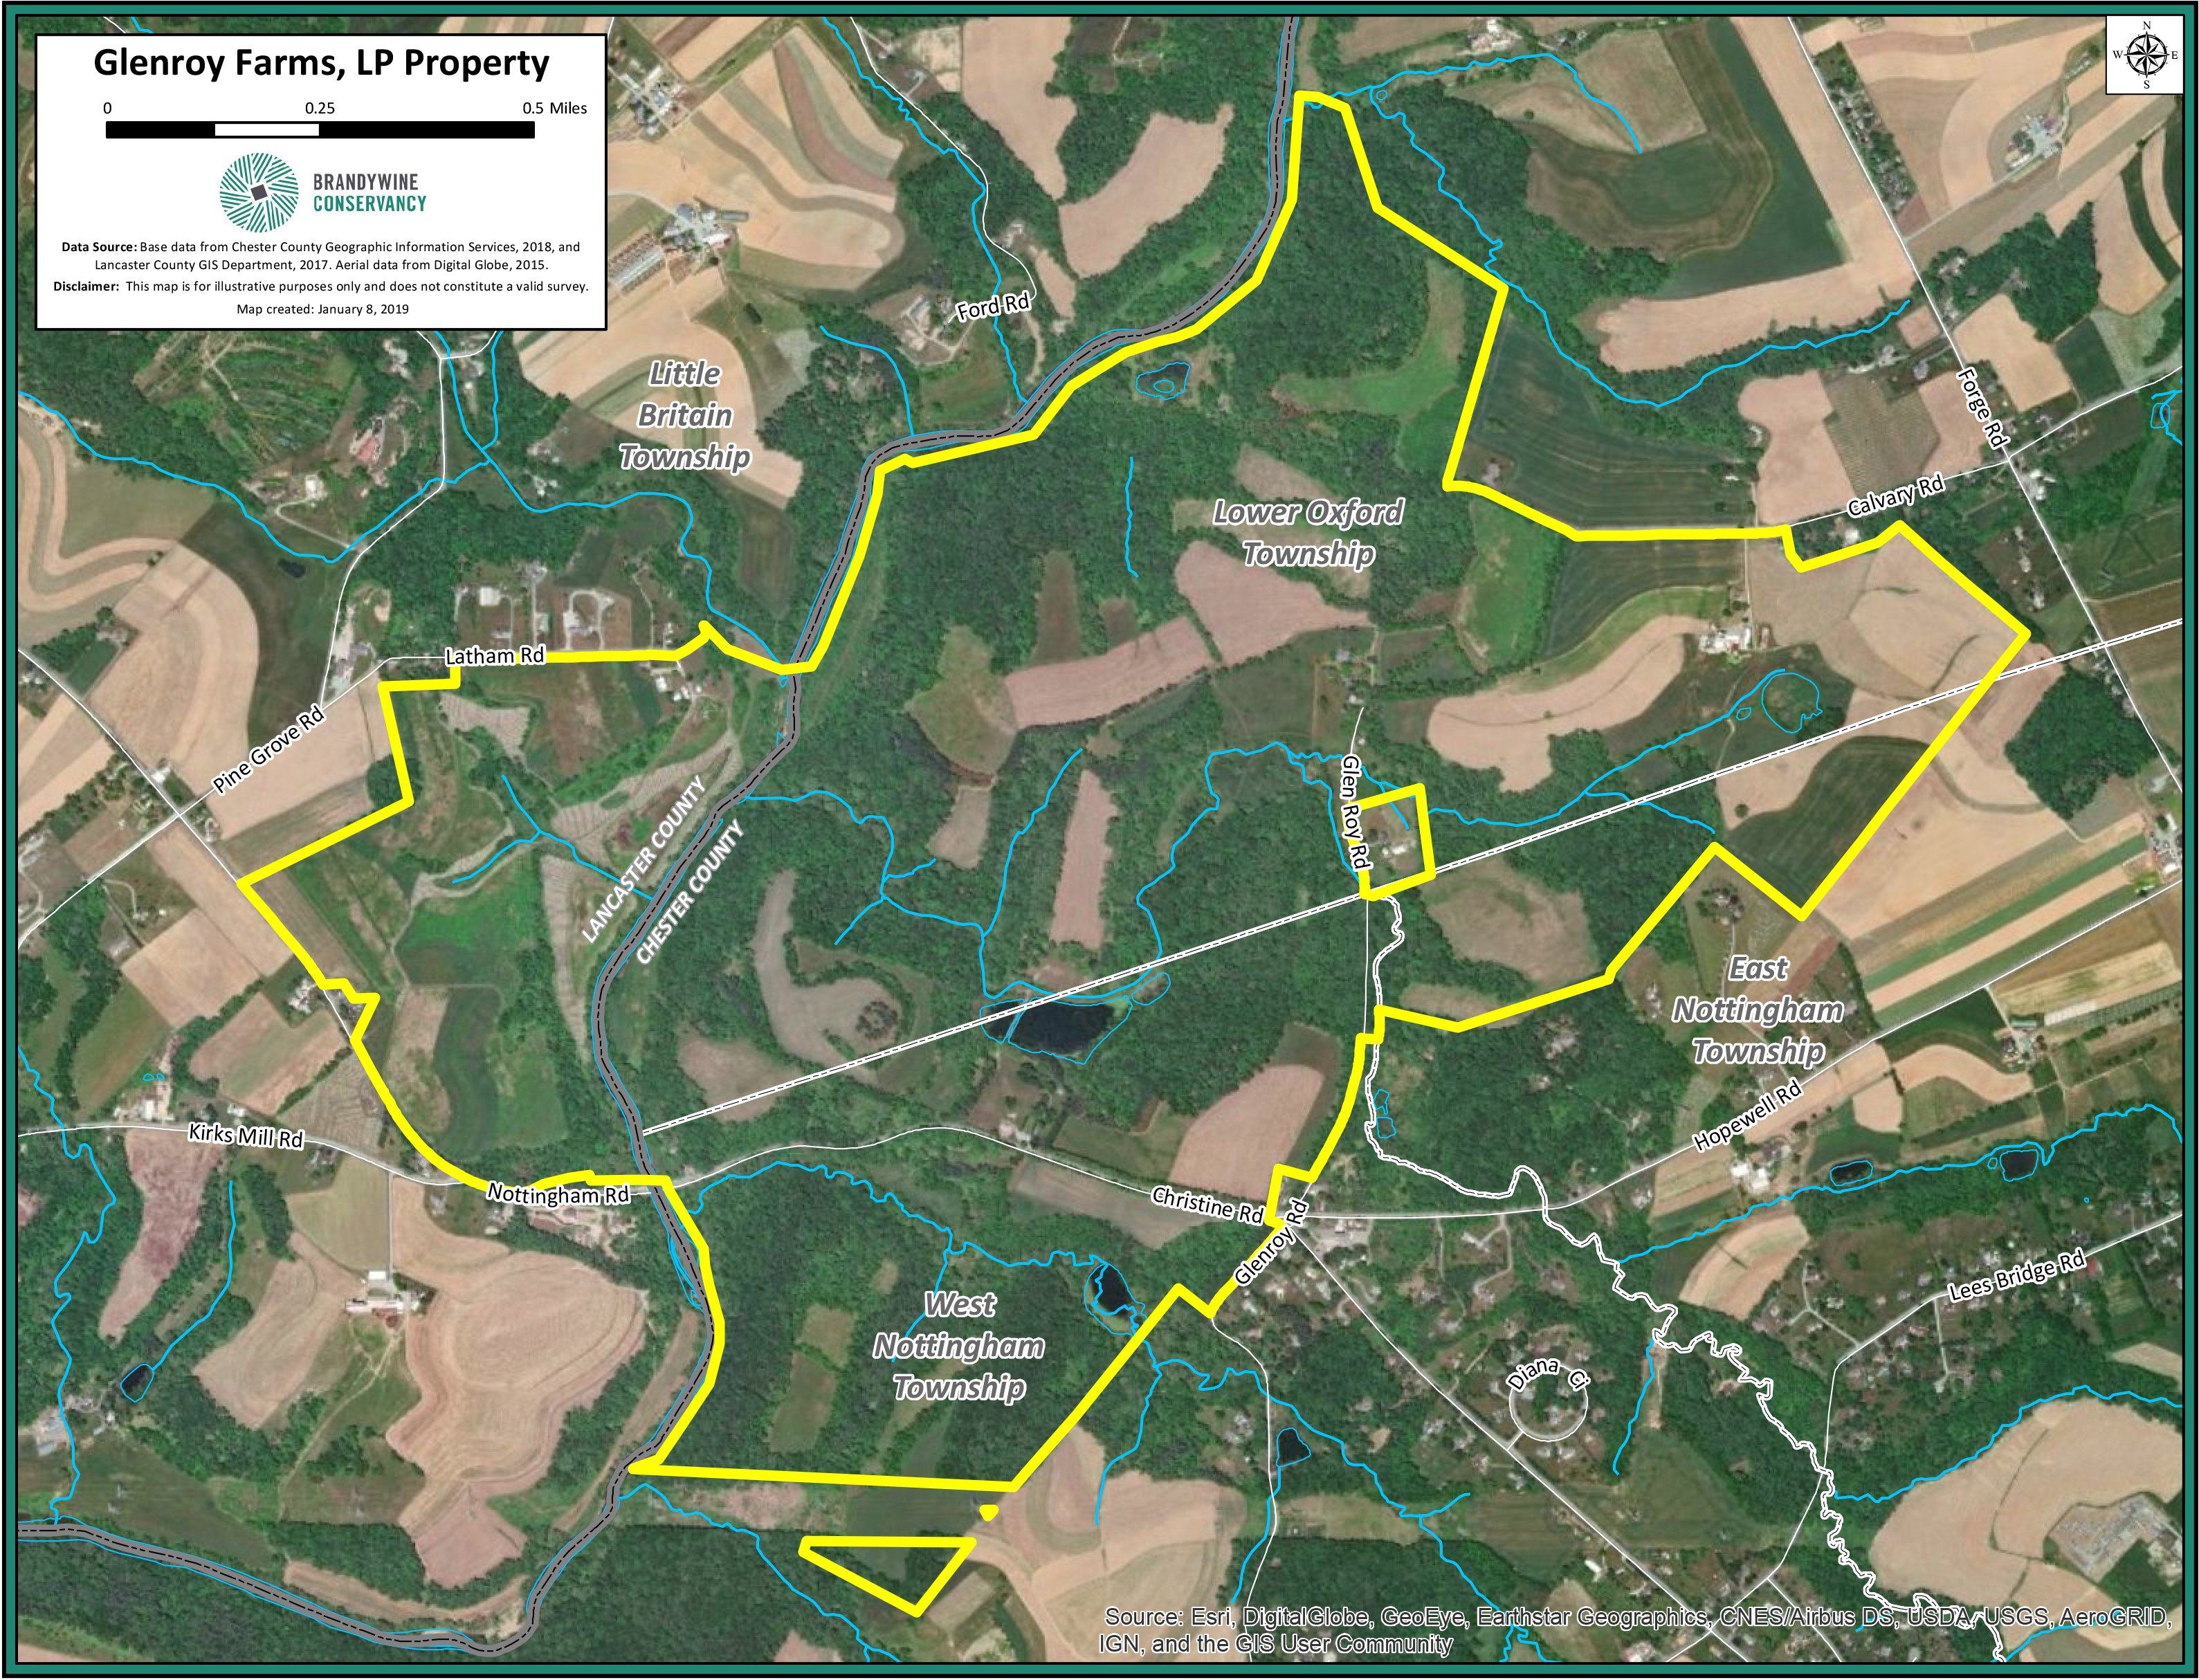 The Brandywine will use the funds to acquire and preserve this 569-acre natural area along the Octoraro Creek in Lower Oxford and West Nottingham Townships, Chester County